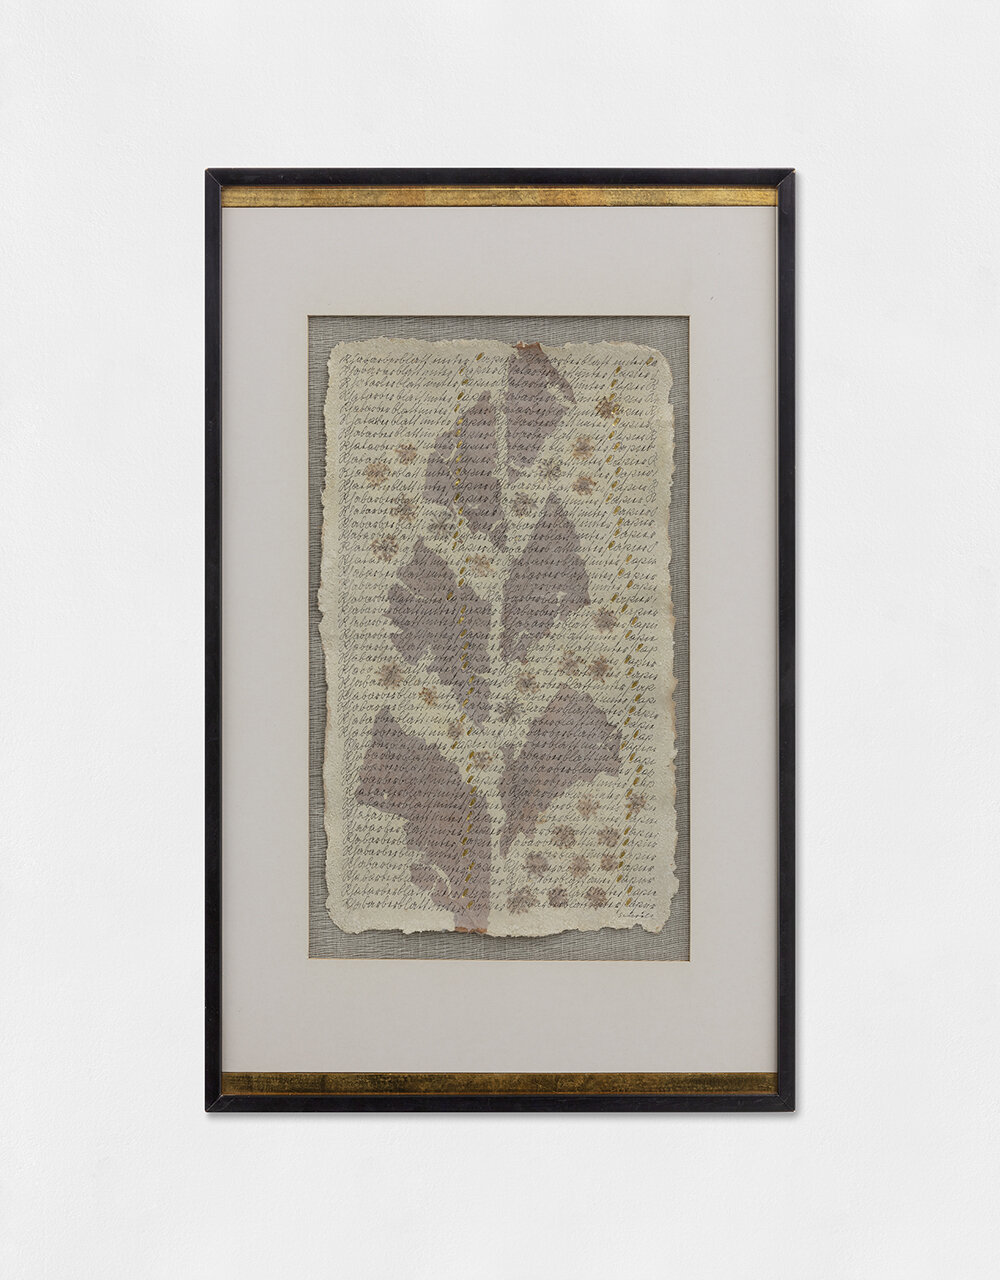   Untitled, 1978/80 , Dry leaves, china, and gold leaf on handmade paper, 33 x 19.5 cm 